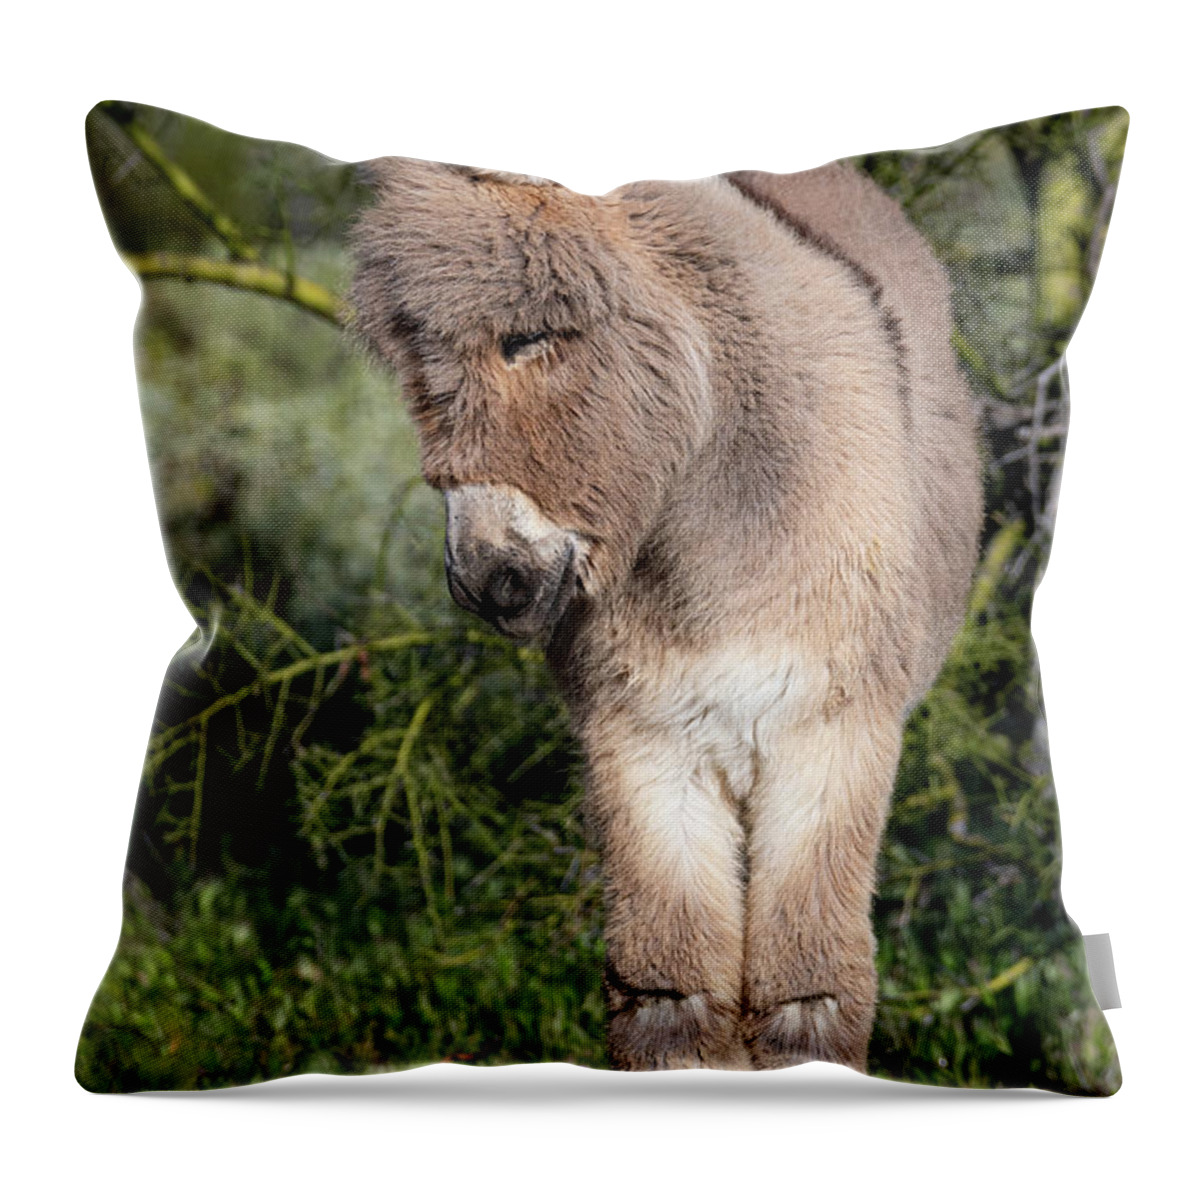 Wild Burros Throw Pillow featuring the photograph Just too Sweet by Mary Hone